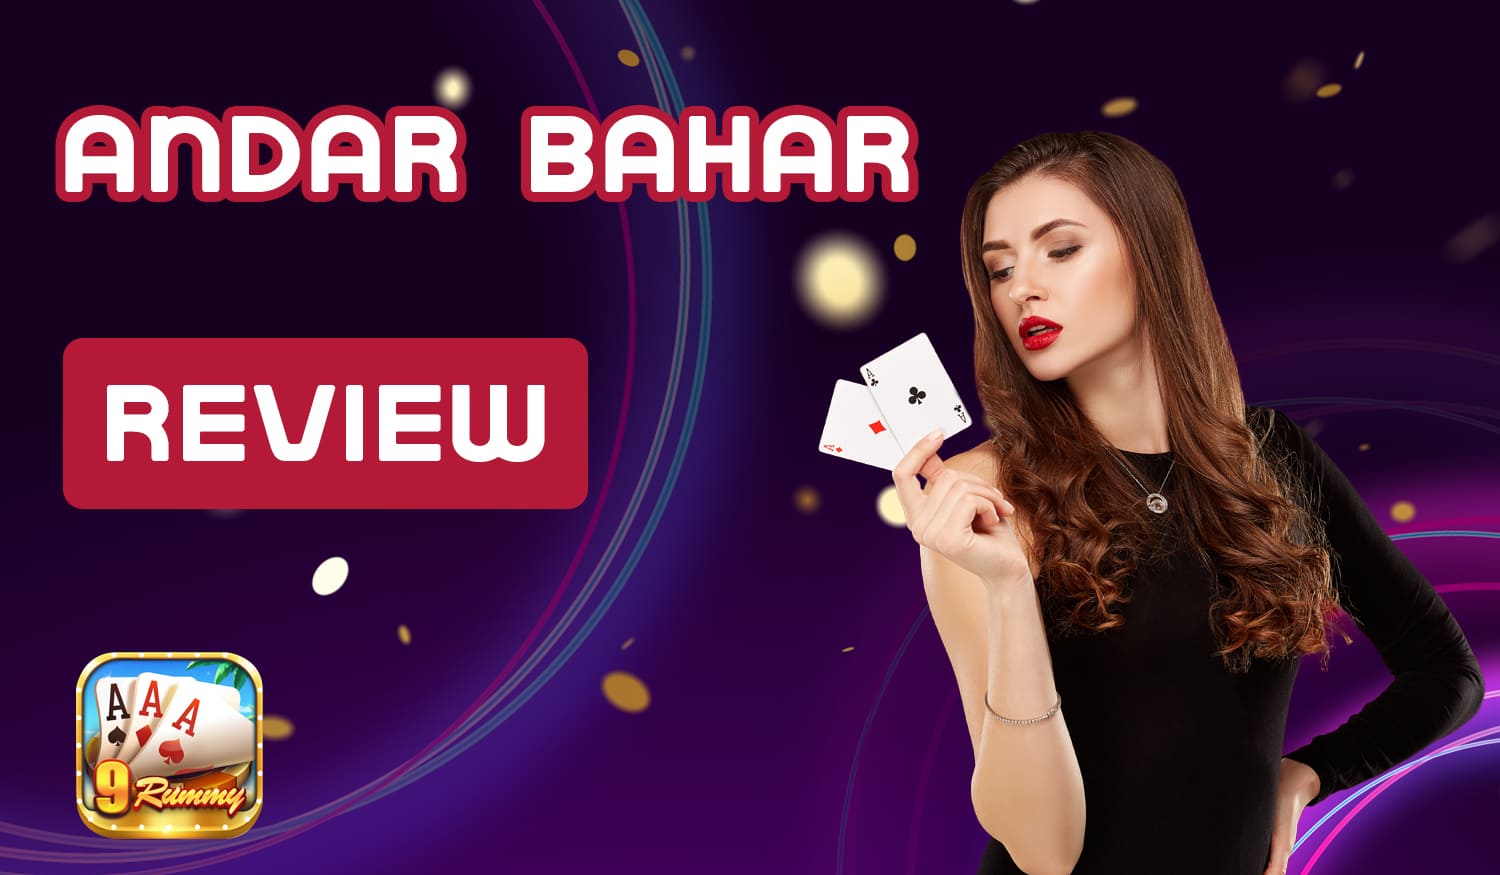 An overview of the popular Andar Bahar game in India for 9 Rummy users